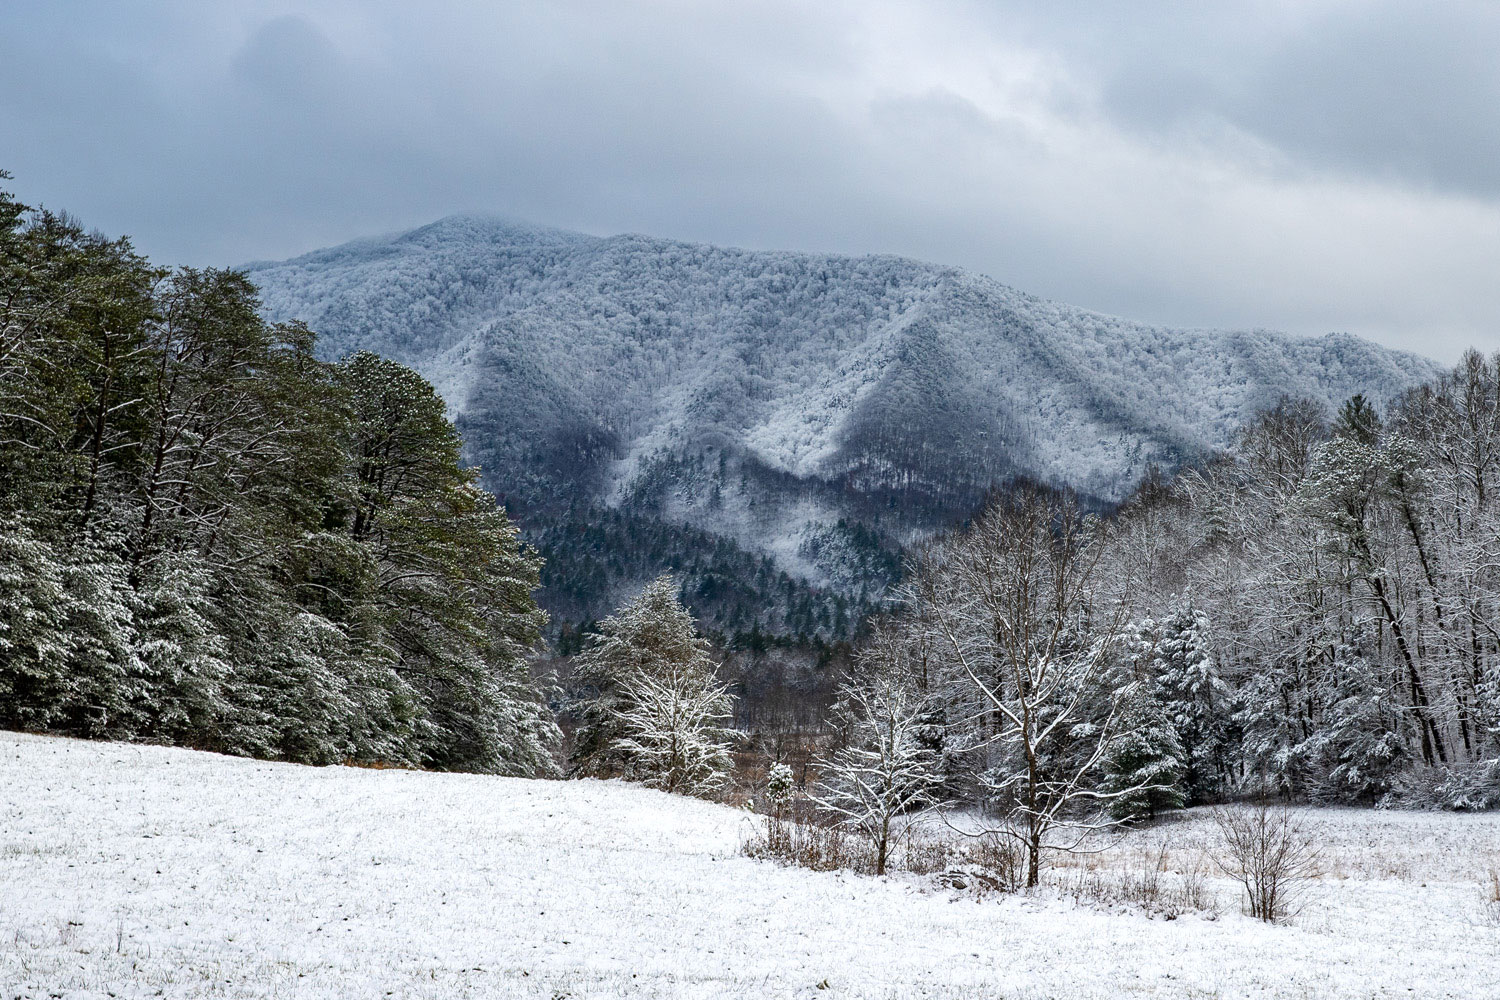 Cades Cove is quiet and still under slate gray skies and a fresh coat of snow.